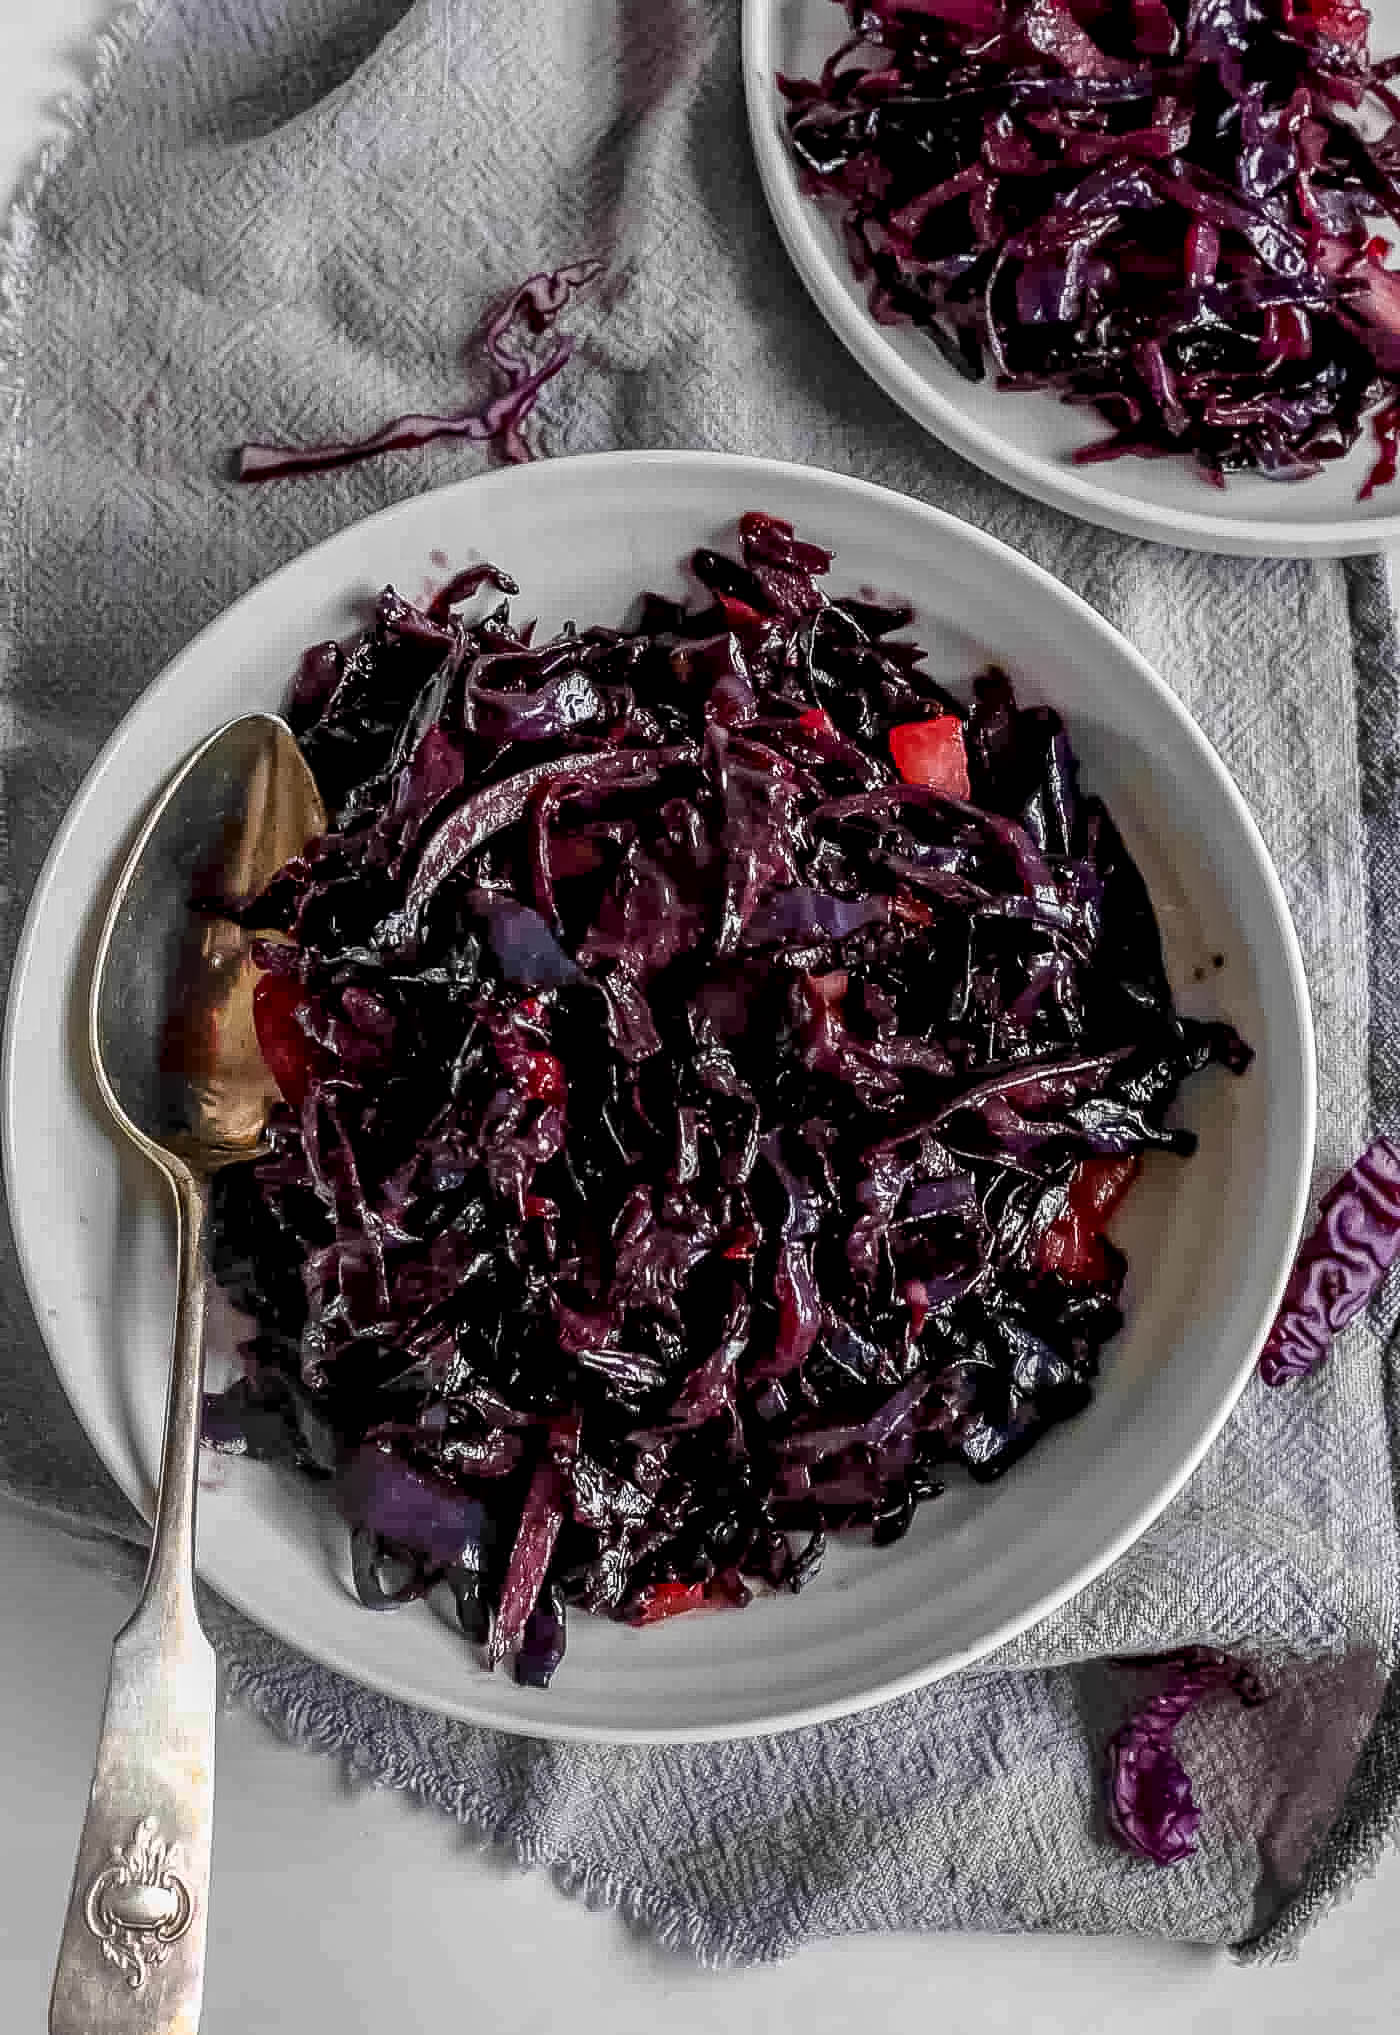 buttery braised red cabbage shredded in a white serving dish bowl with a large metal serving spoon resting on the side. On a grey napkin. A smaller white plate with red cabbage above